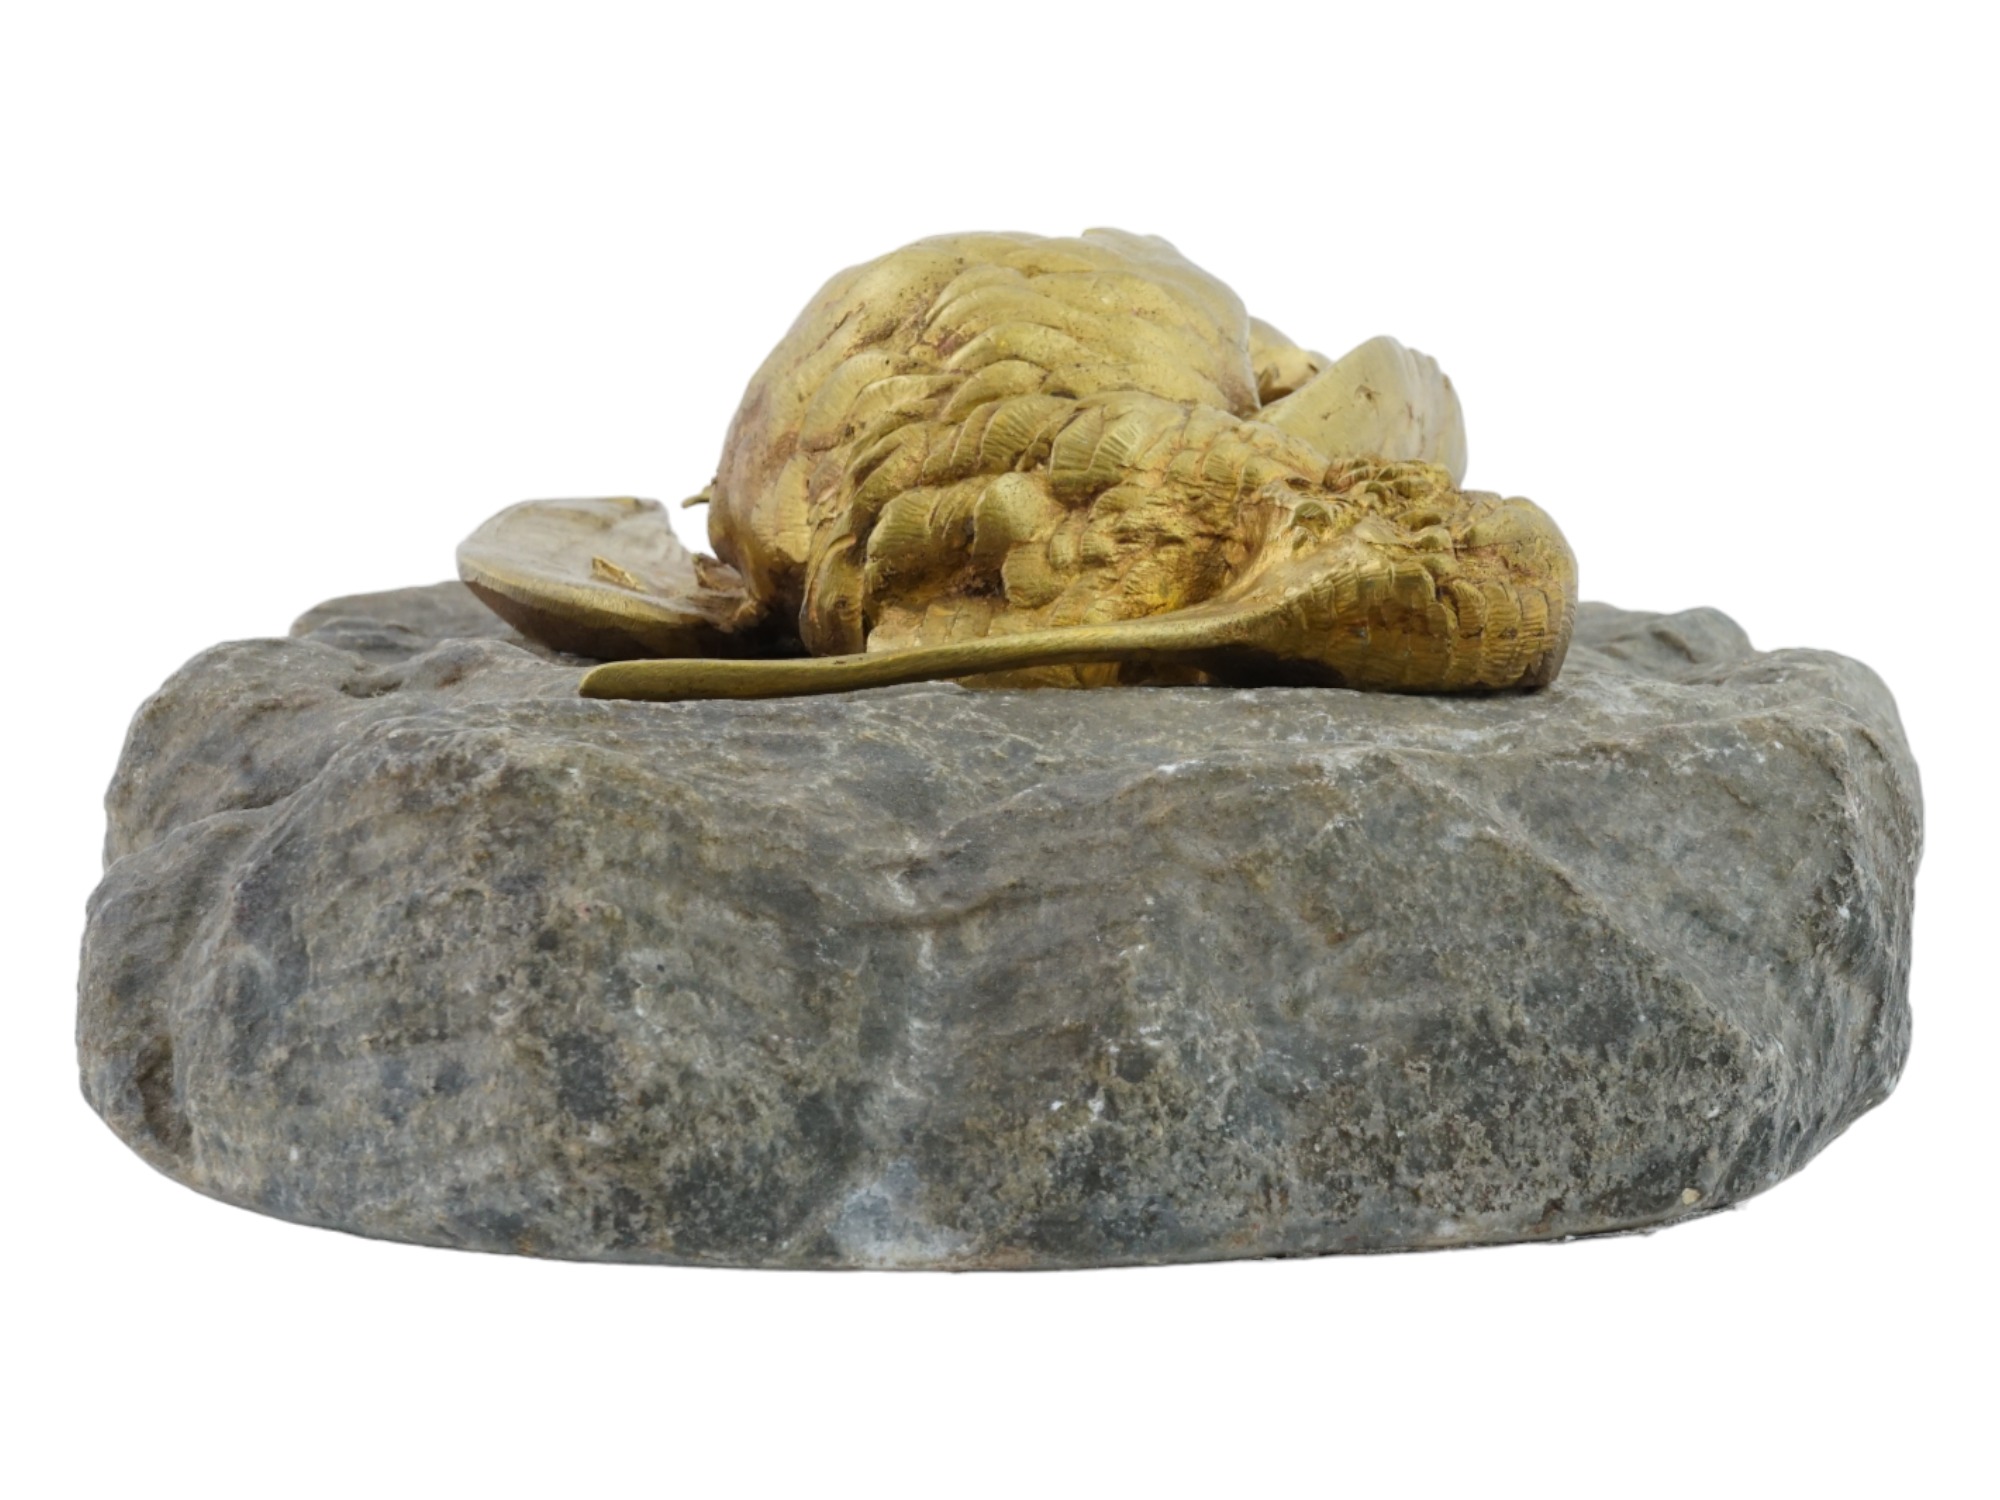 VINTAGE BRONZE SCULPTURE OF A DECEASED BIRD ON STONE PIC-3